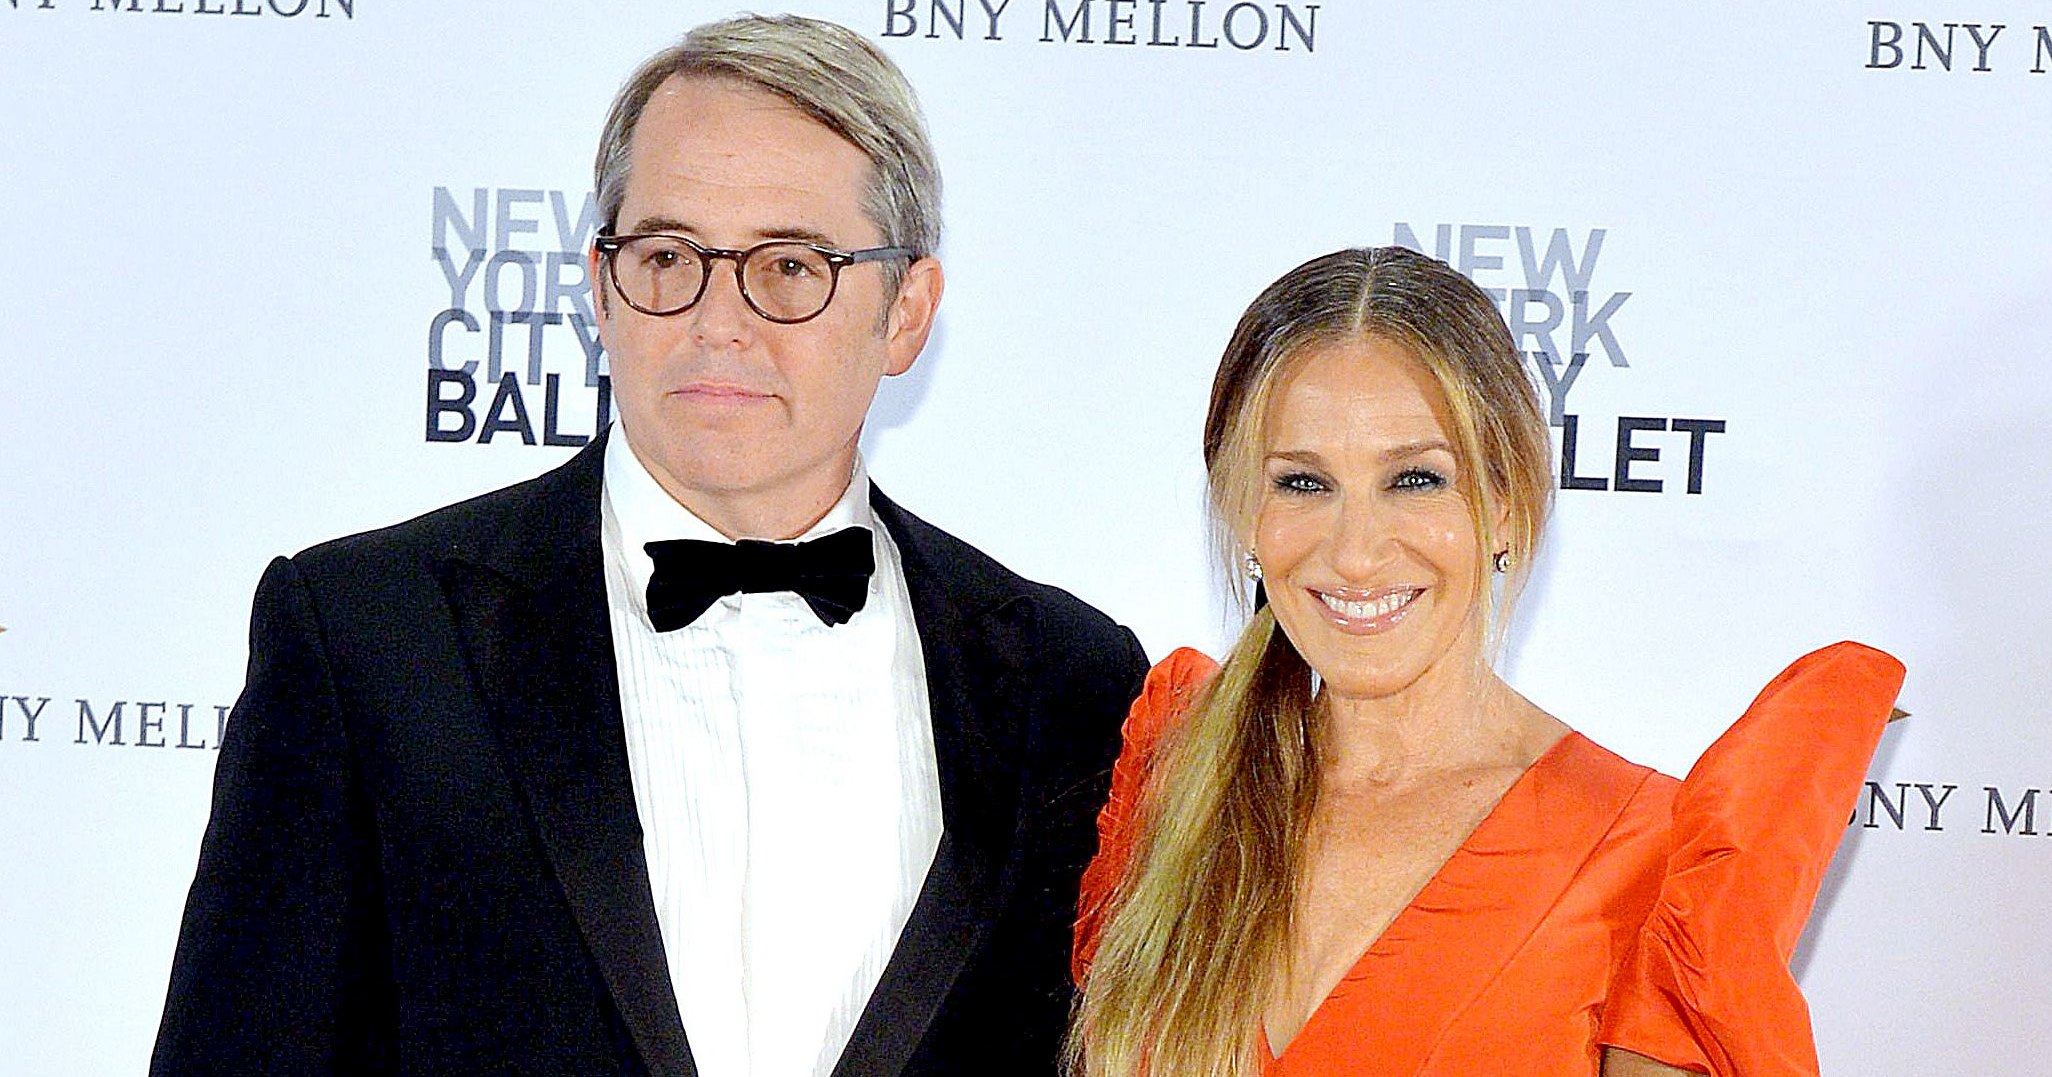 Sarah Jessica Parker and Matthew Broderick's Sweetest Moments